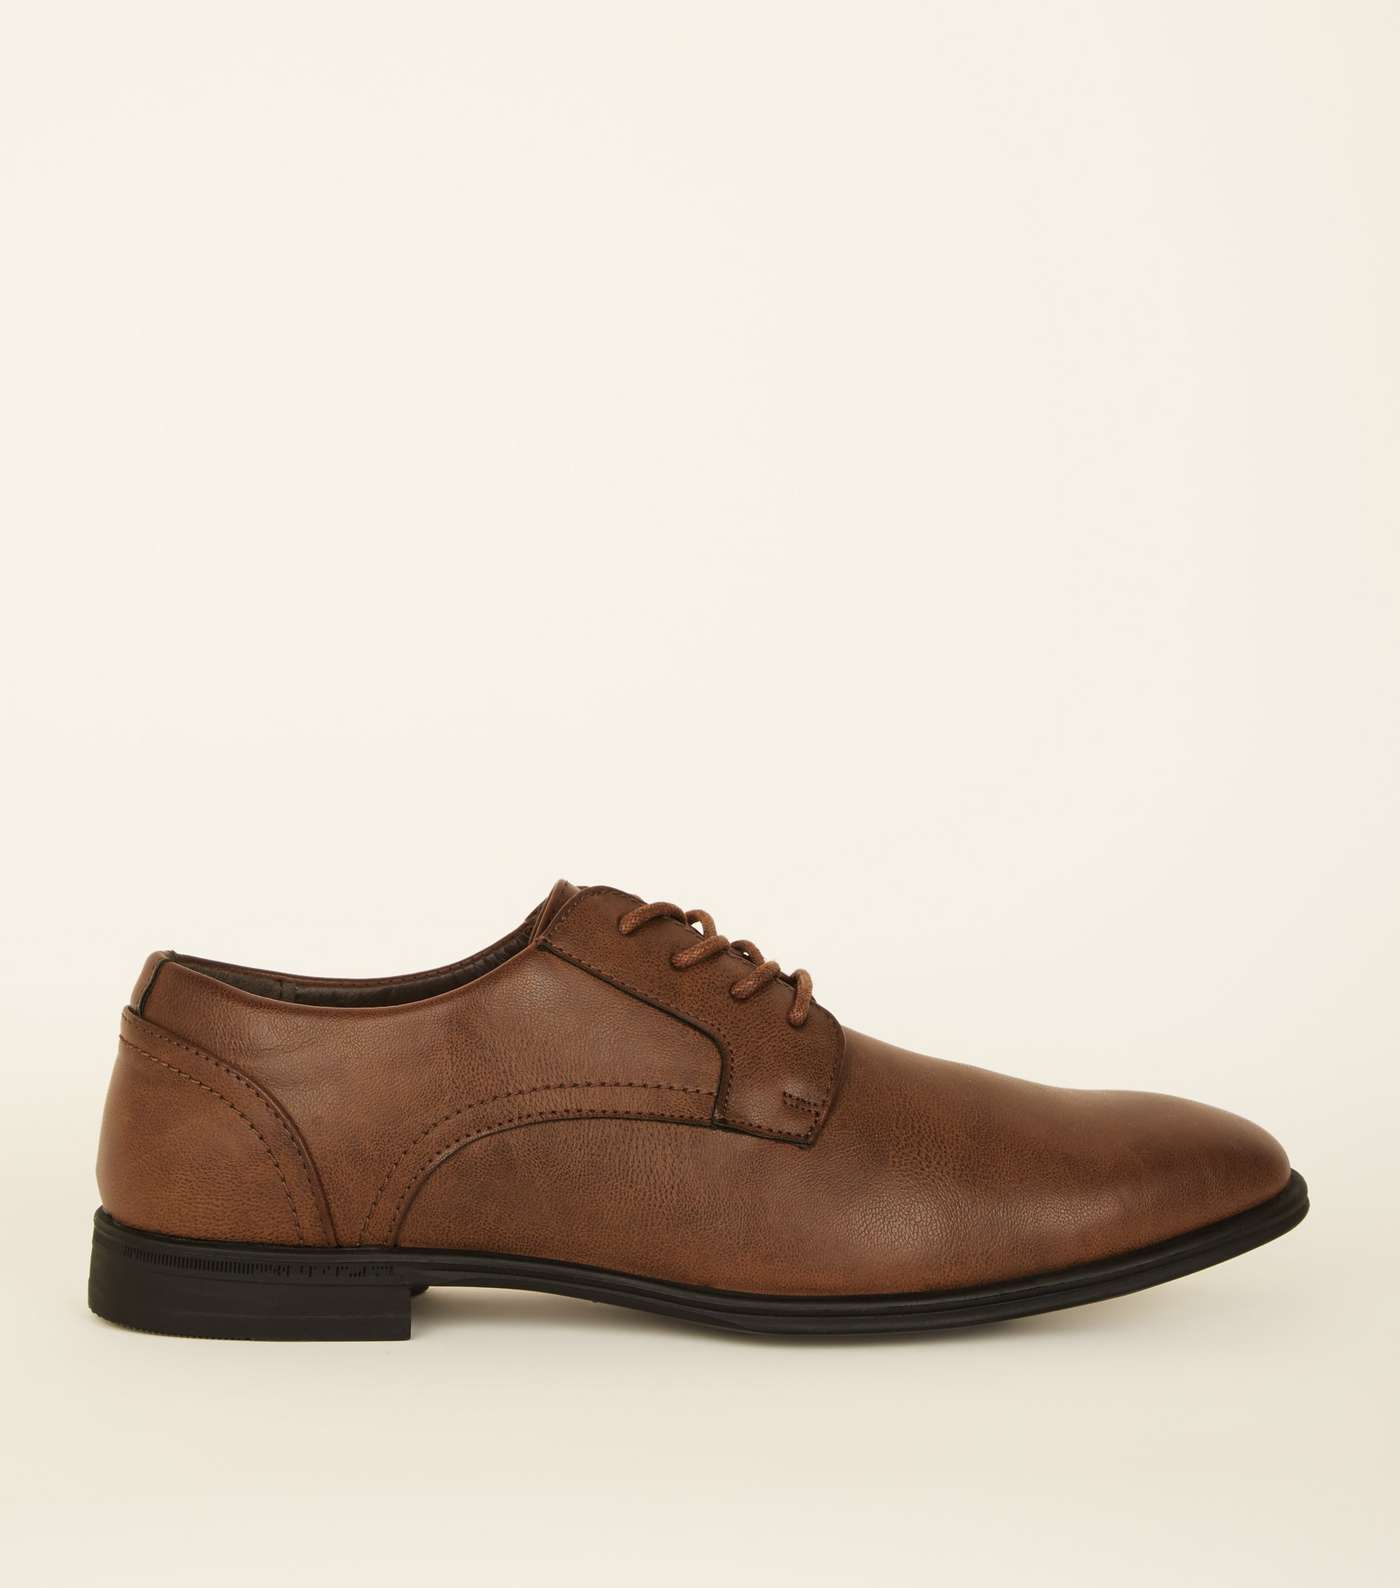 Dark Brown Leather-Look Lace-Up Formal Shoes Image 2